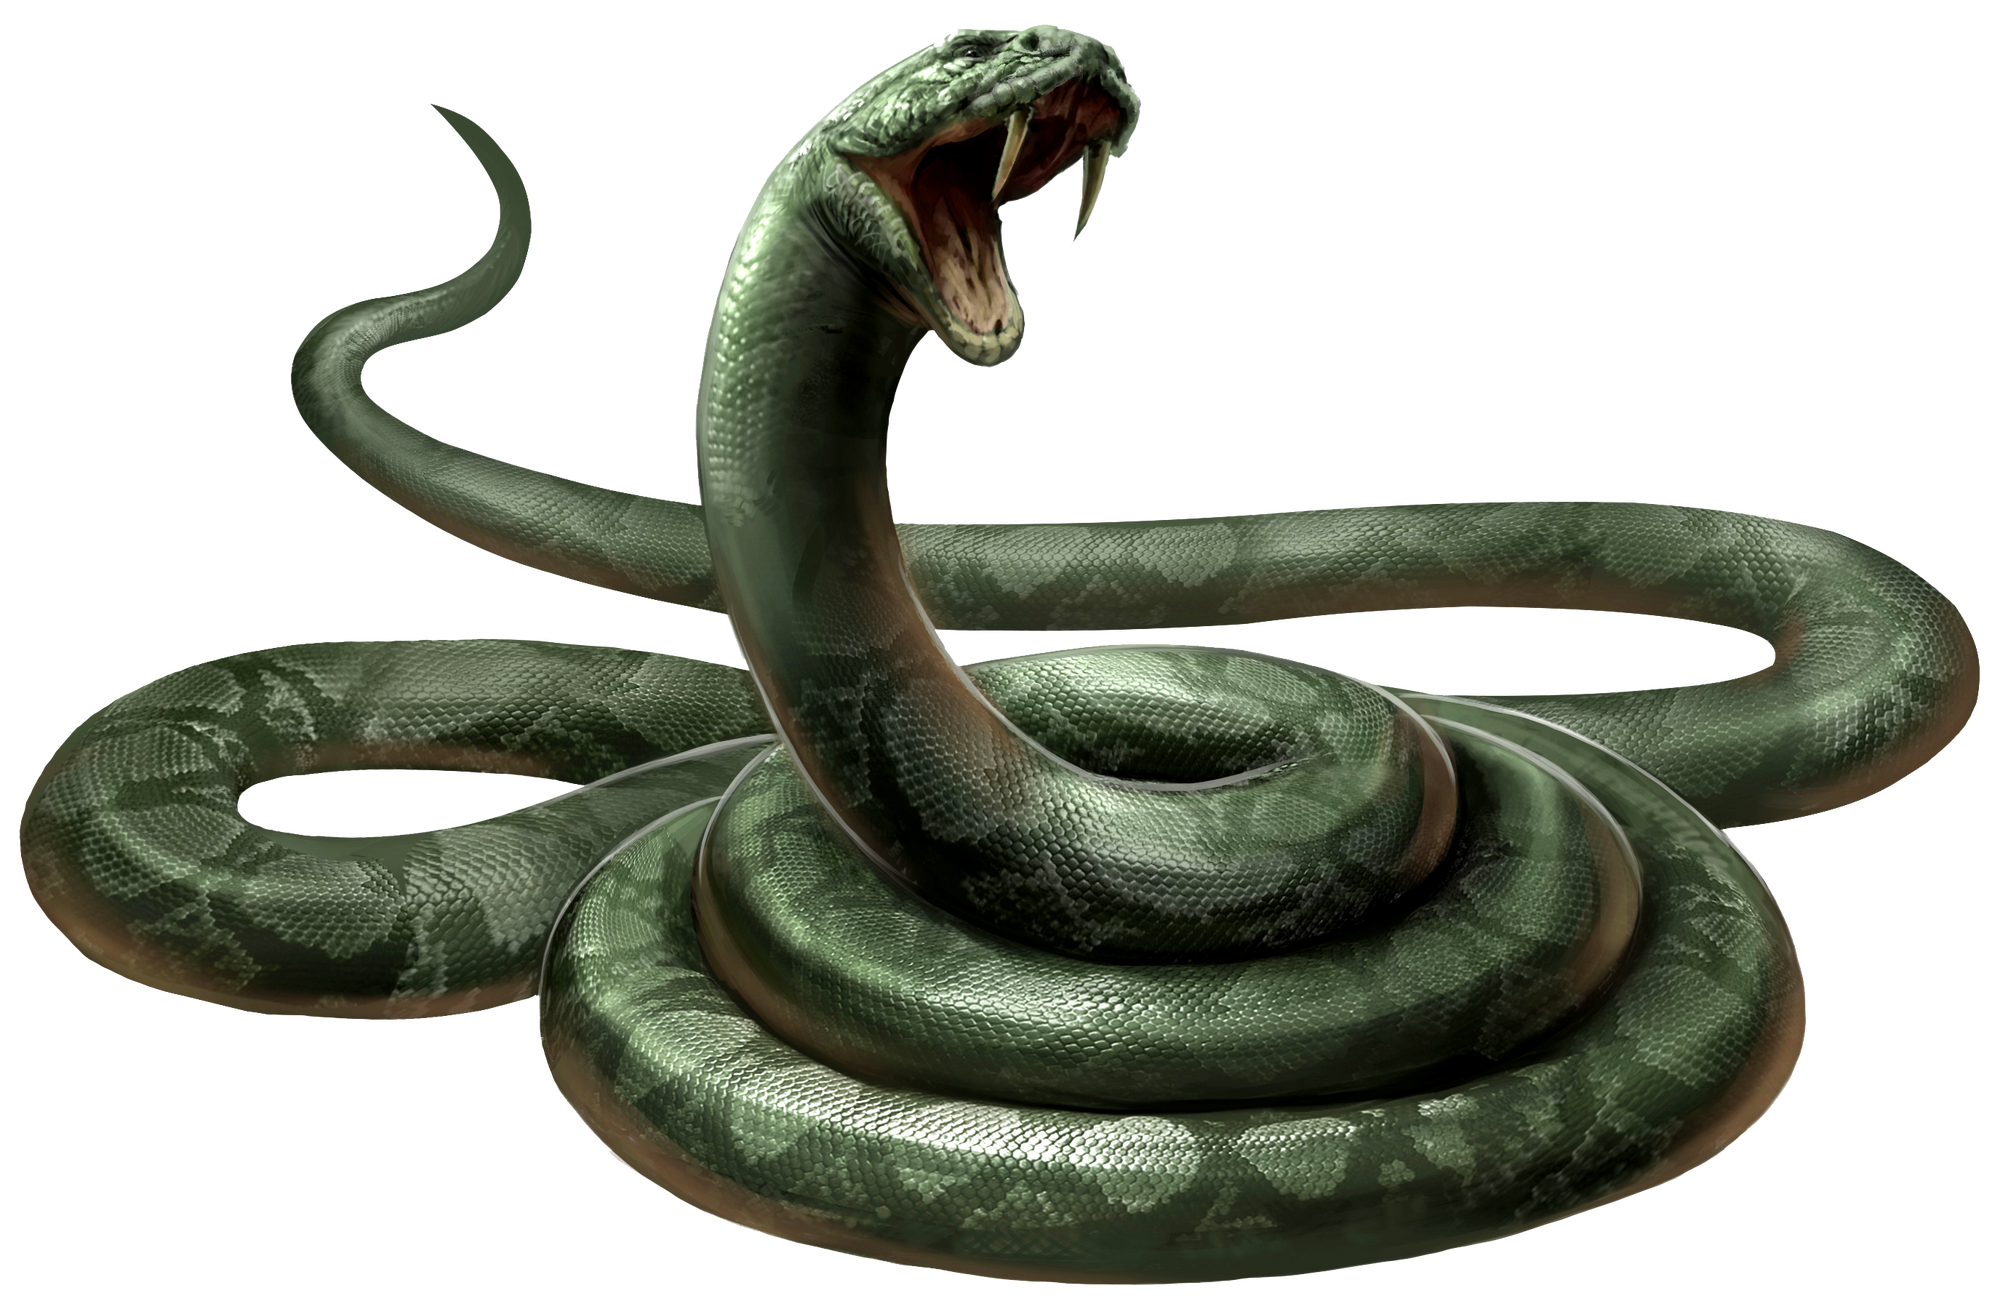 Snake Harry Potter Wiki Fandom Powered By Wikia - cool names boys snakes